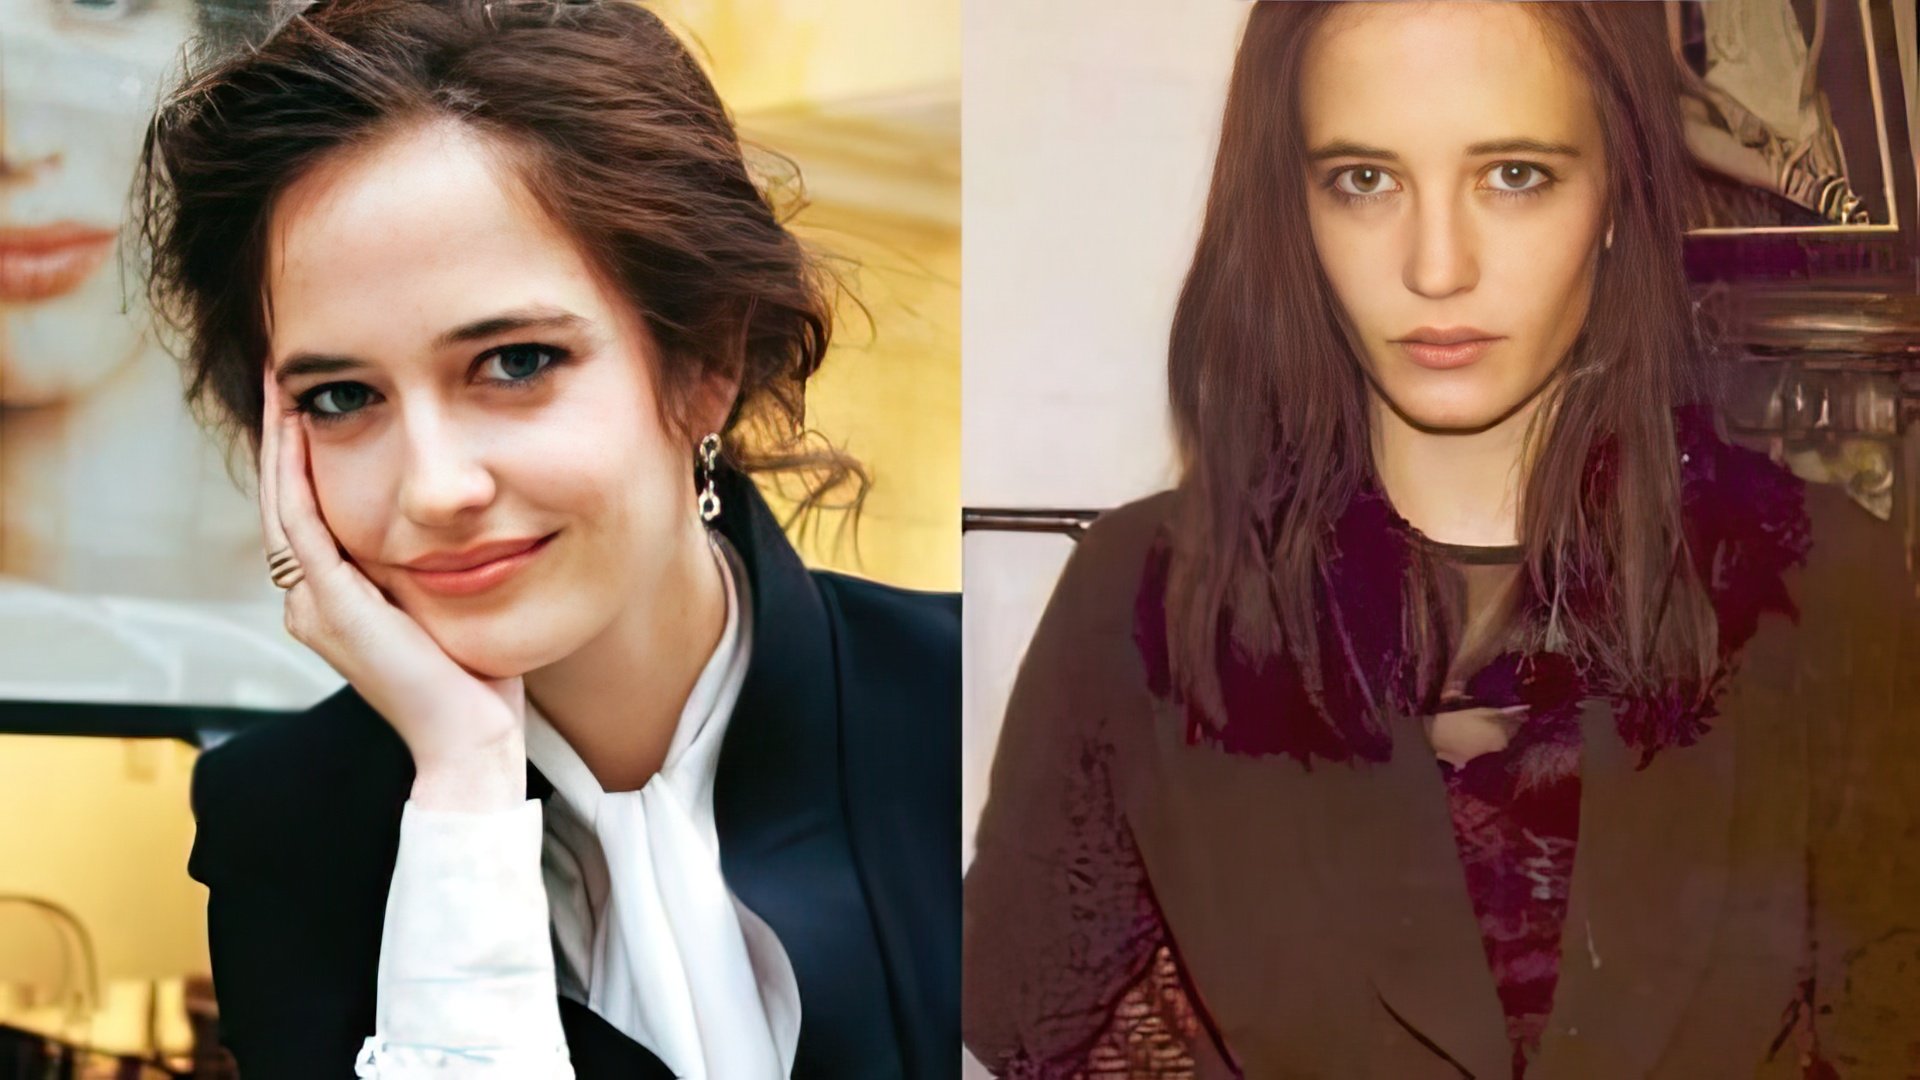 Eva Green before becoming well-known